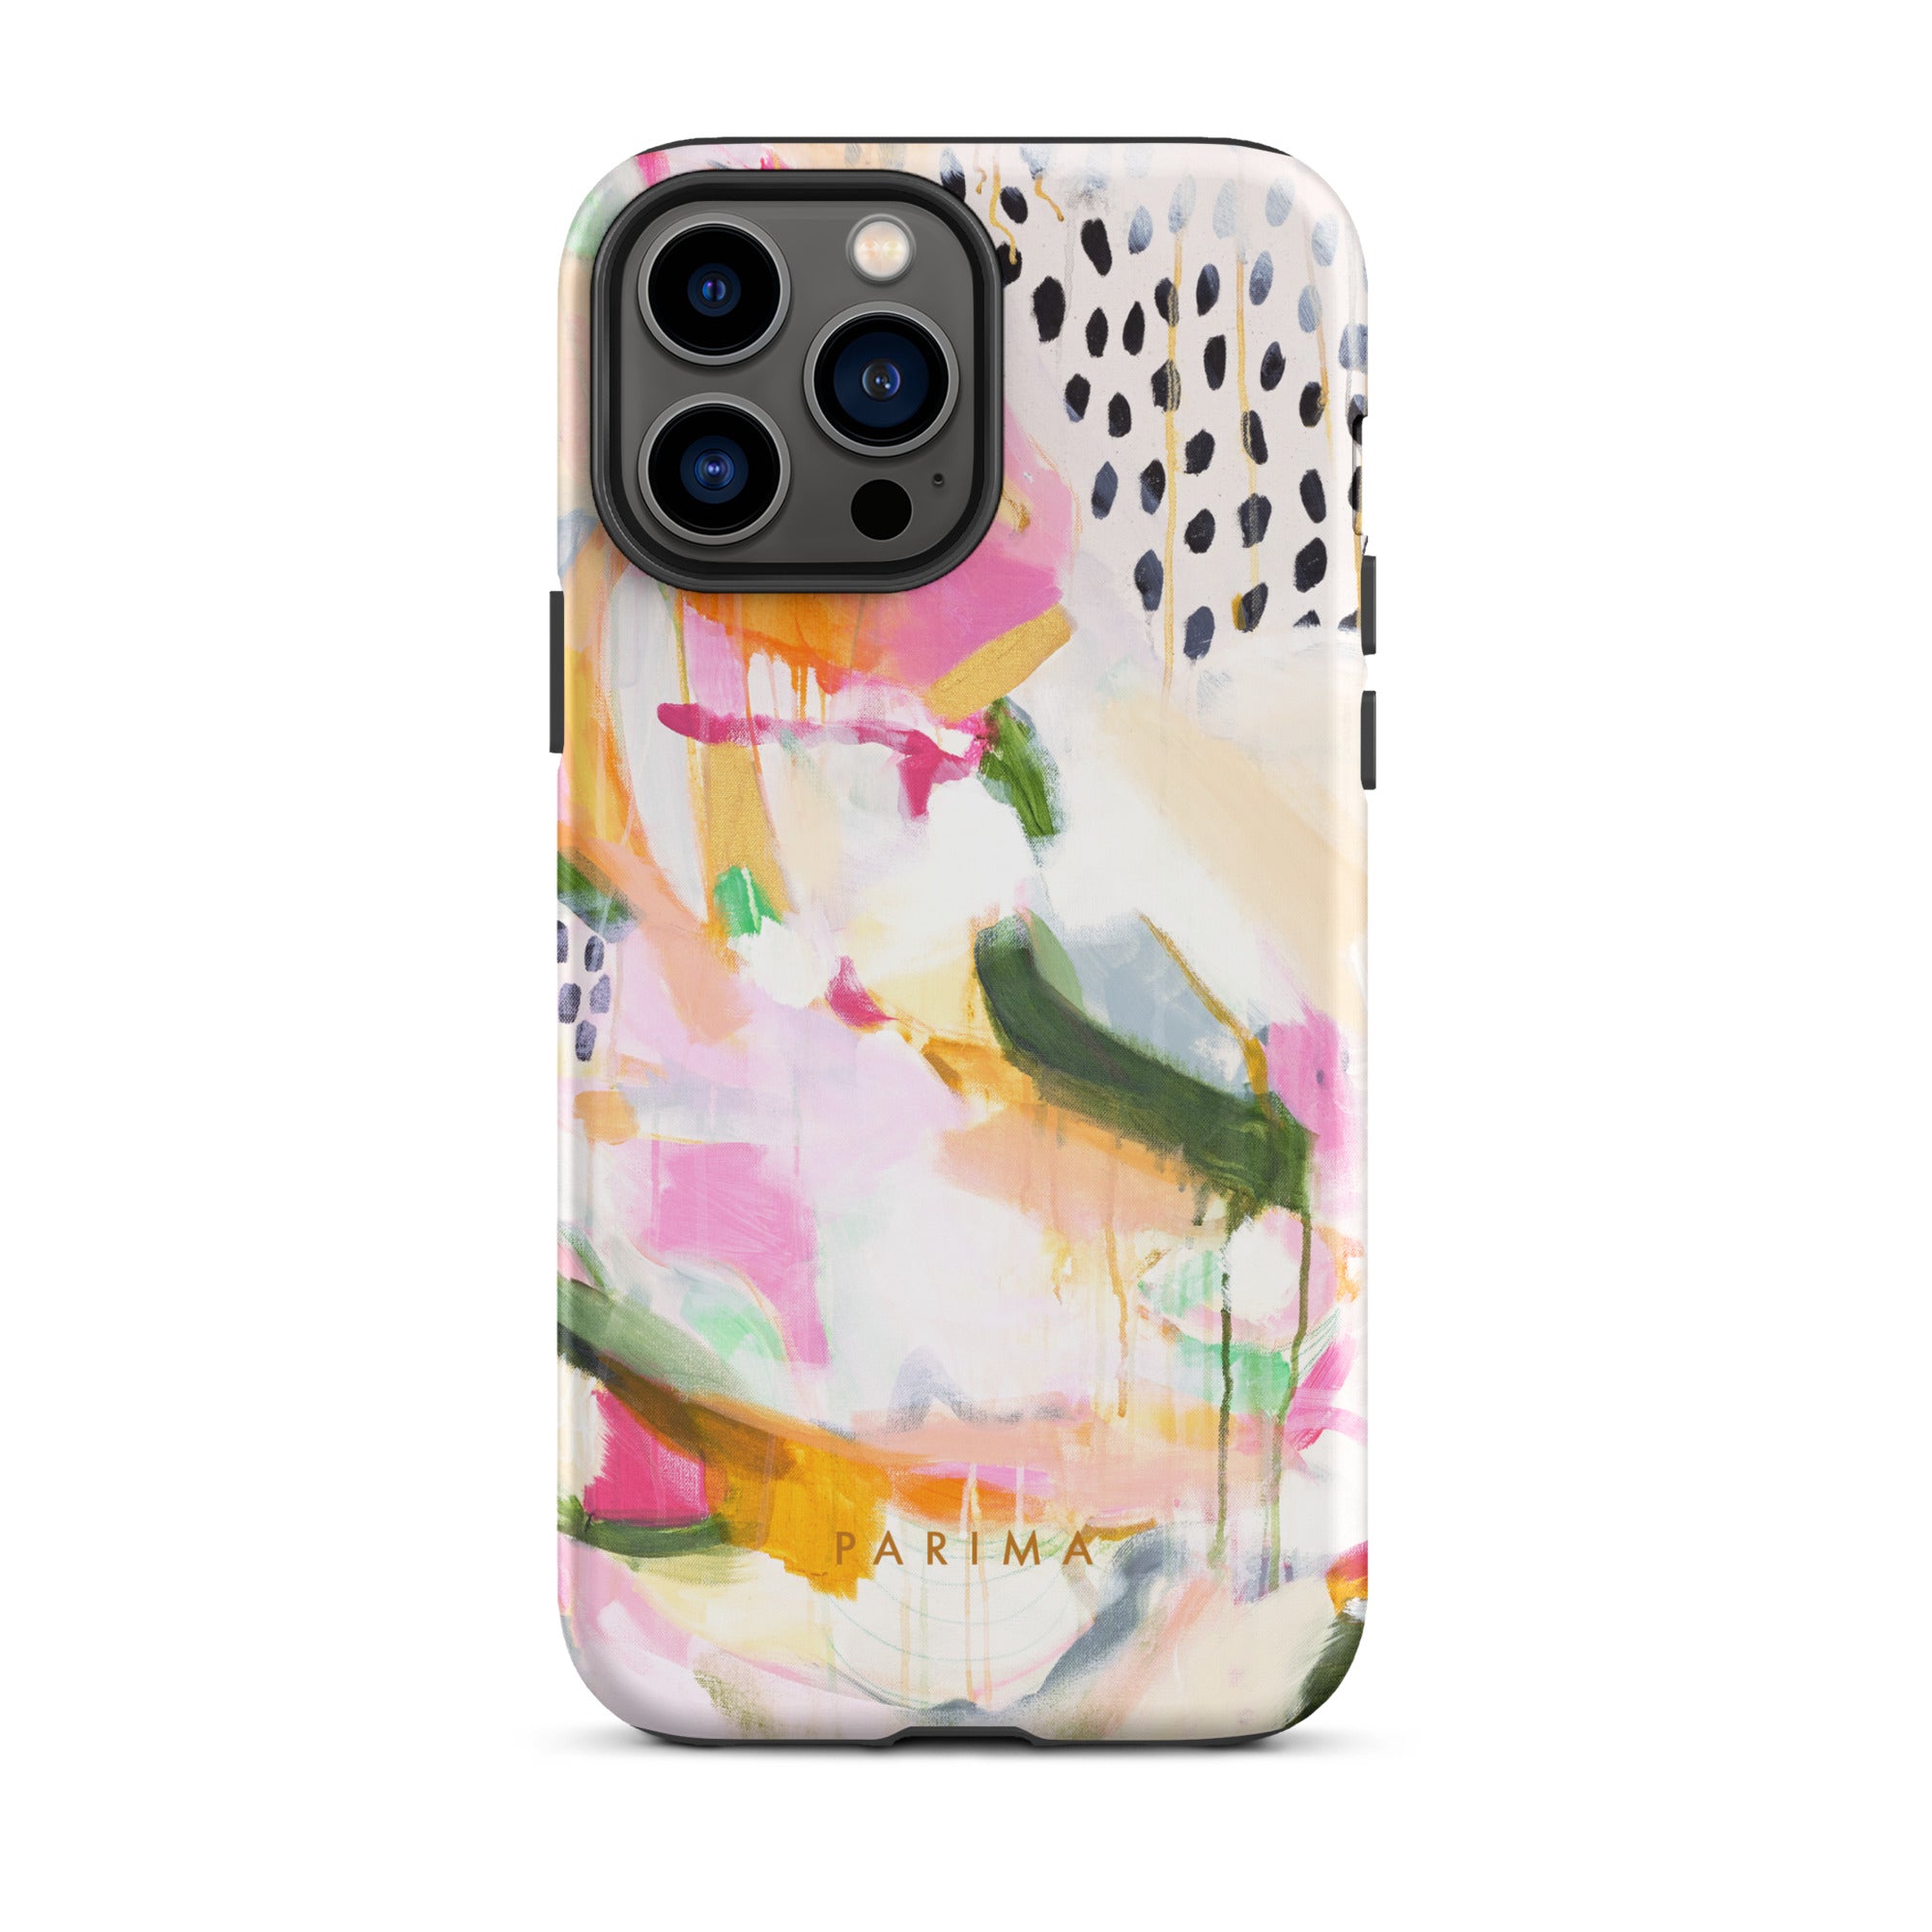 Adira, pink and green abstract art - iPhone 13 Pro Max tough case by Parima Studio